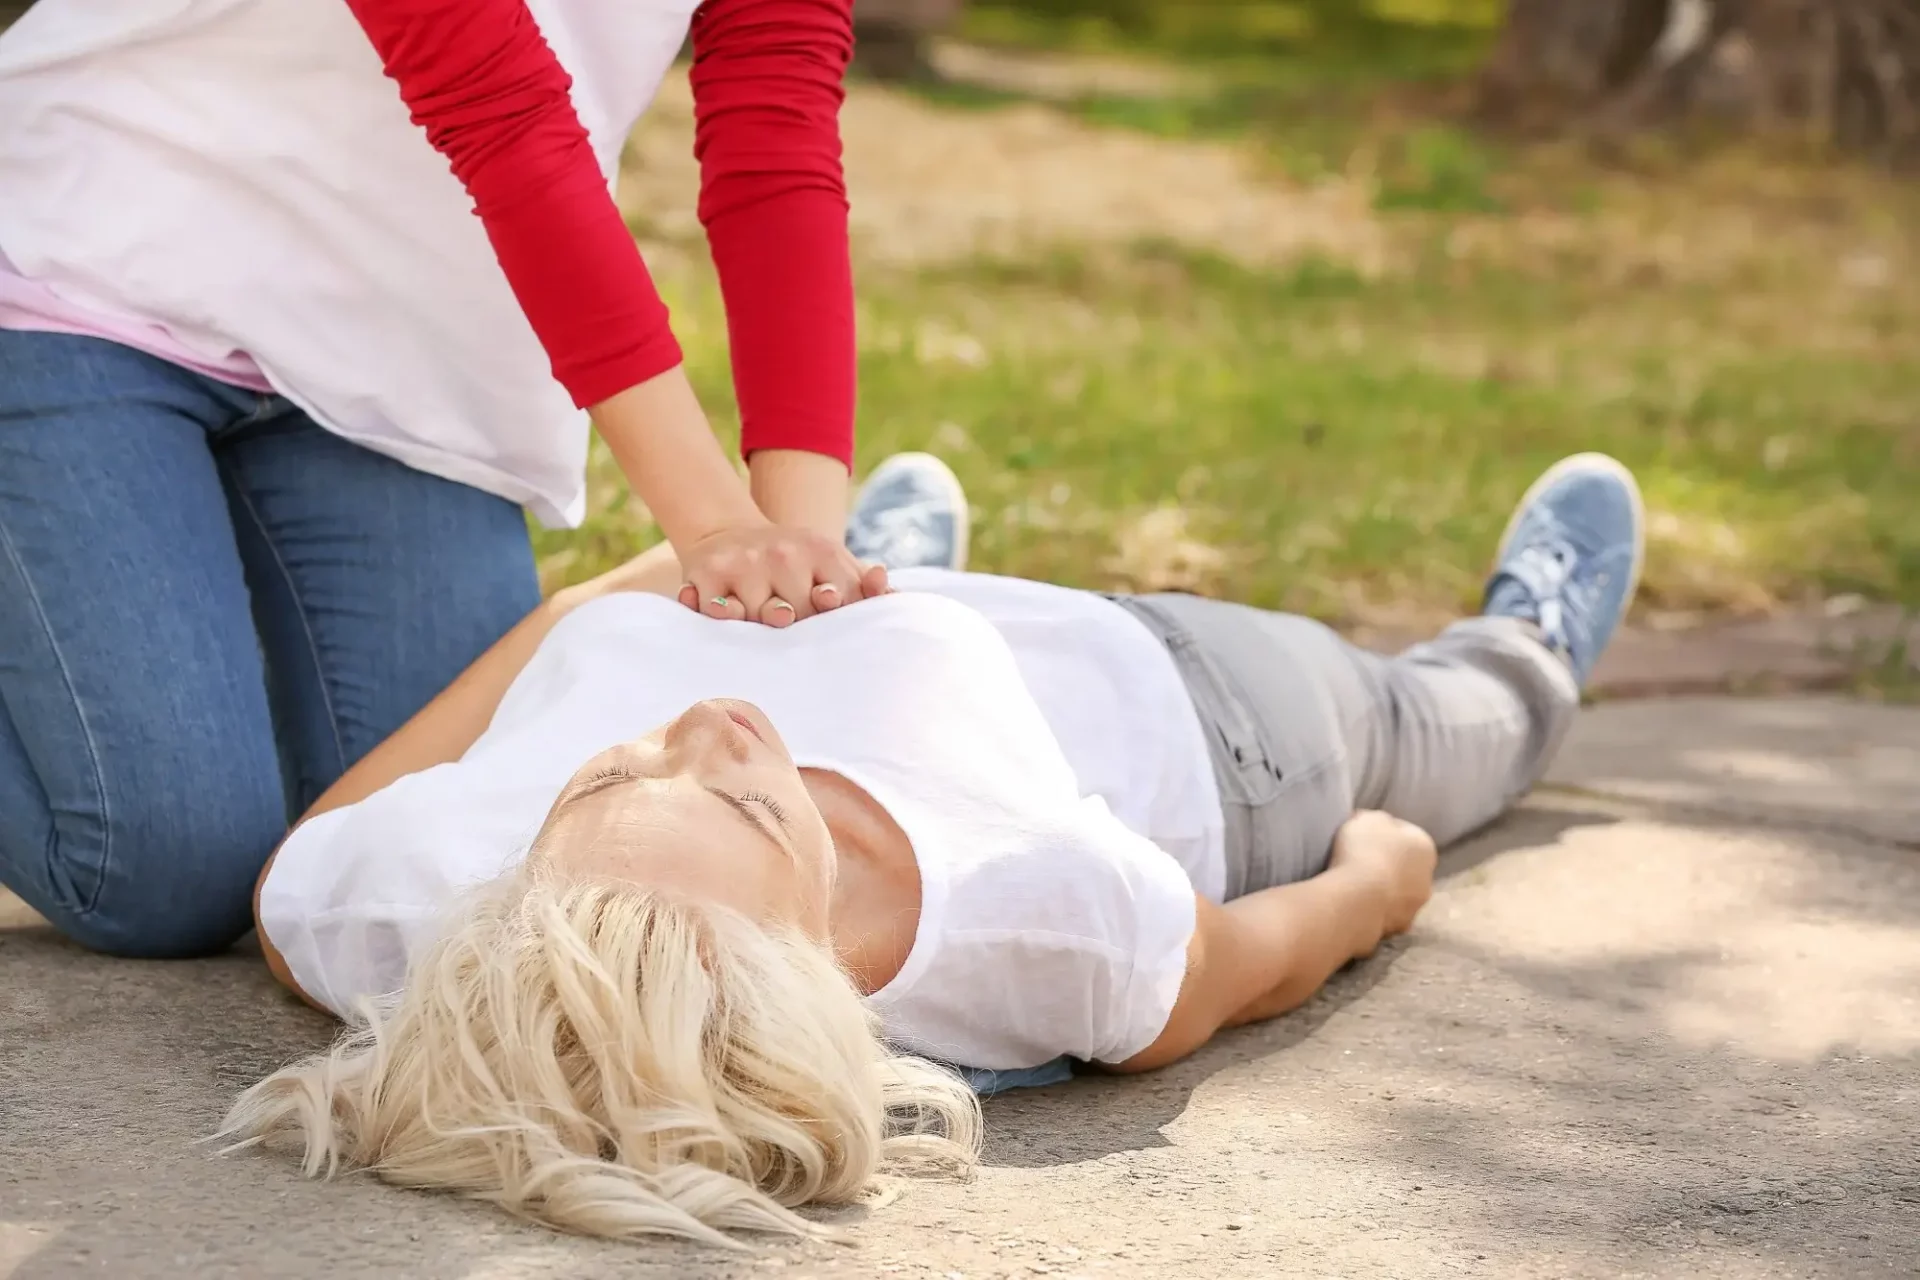 cpr on a pregnant woman